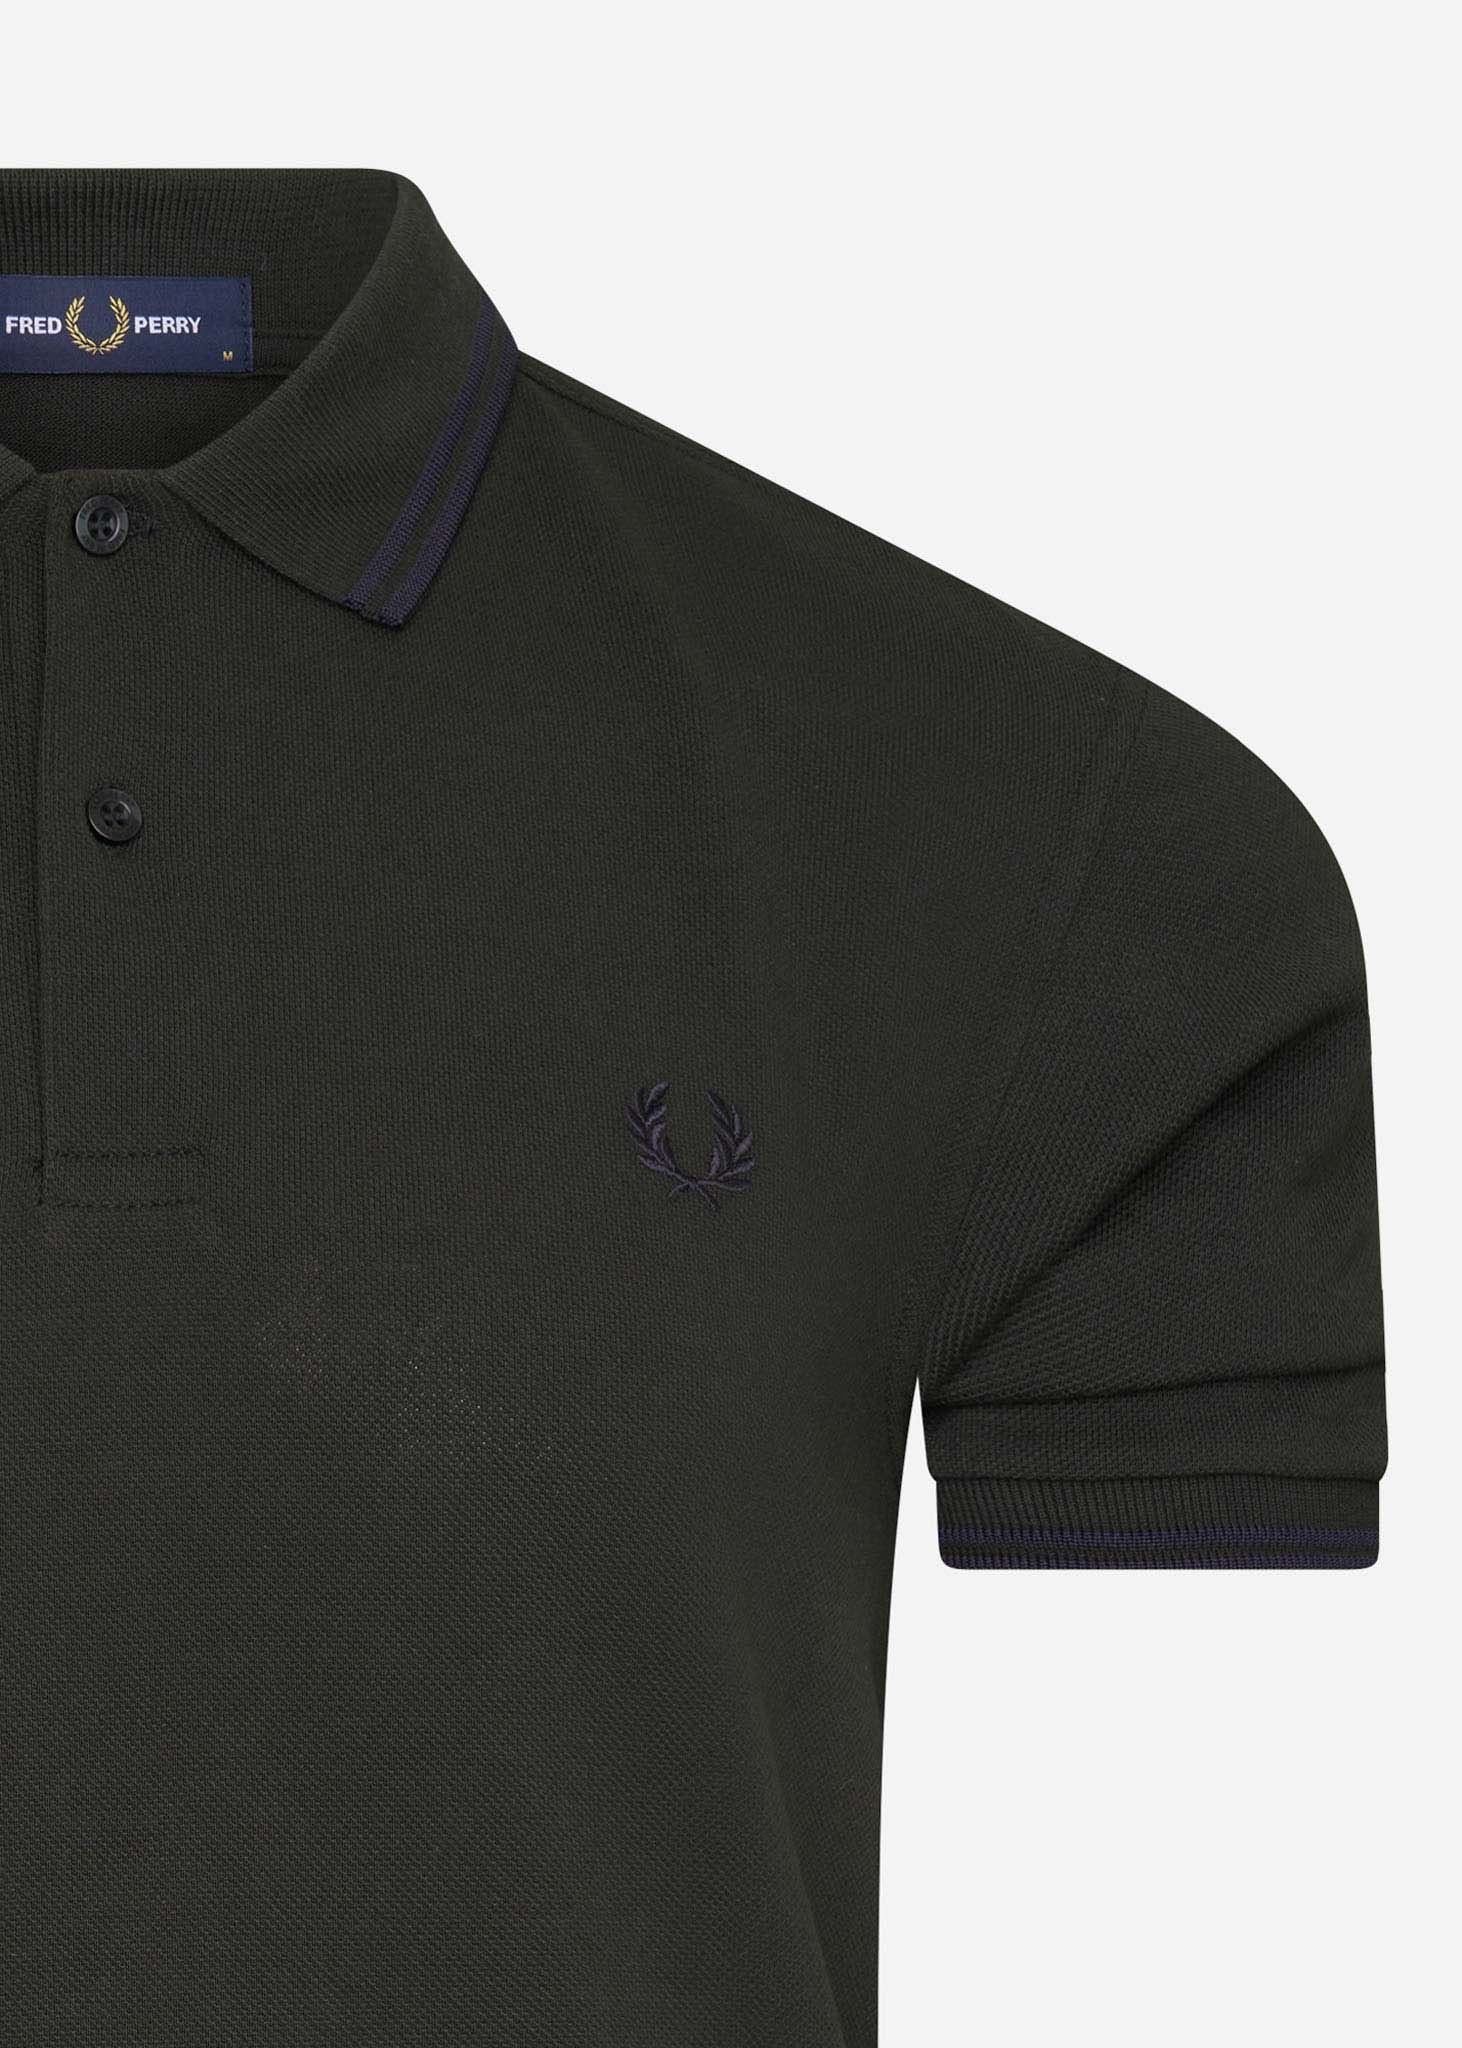 fred perry polo racing green